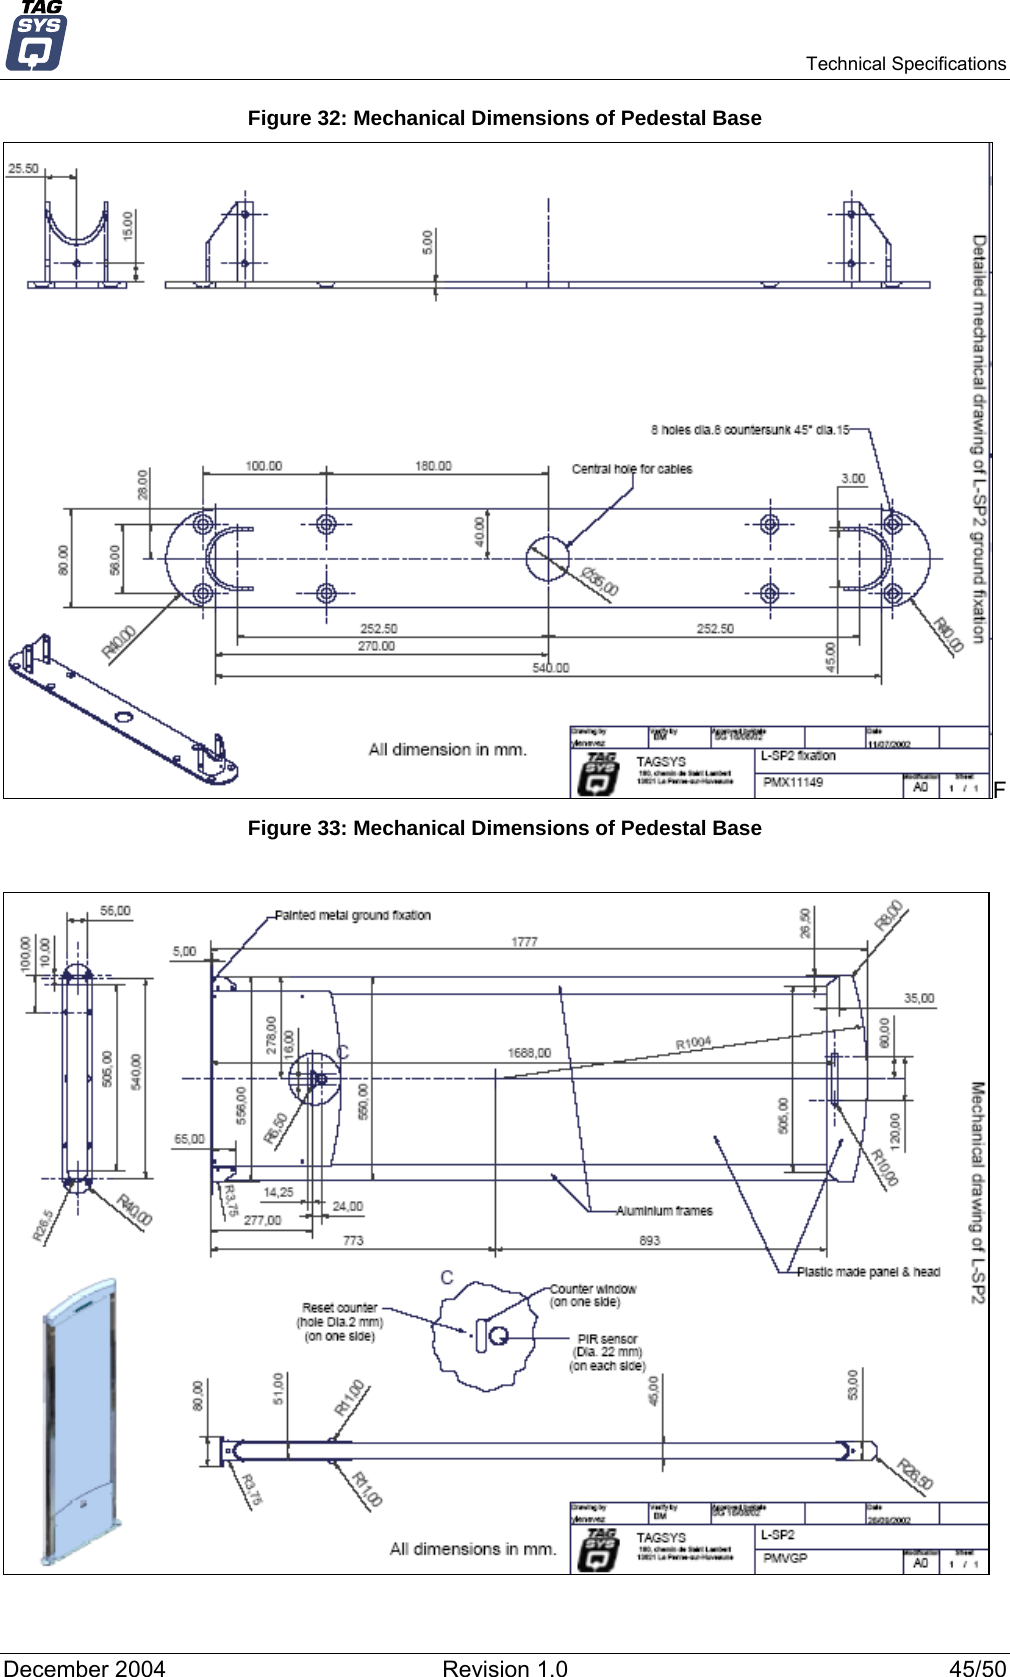   Technical Specifications Figure 32: Mechanical Dimensions of Pedestal Base F Figure 33: Mechanical Dimensions of Pedestal Base   December 2004  Revision 1.0  45/50 